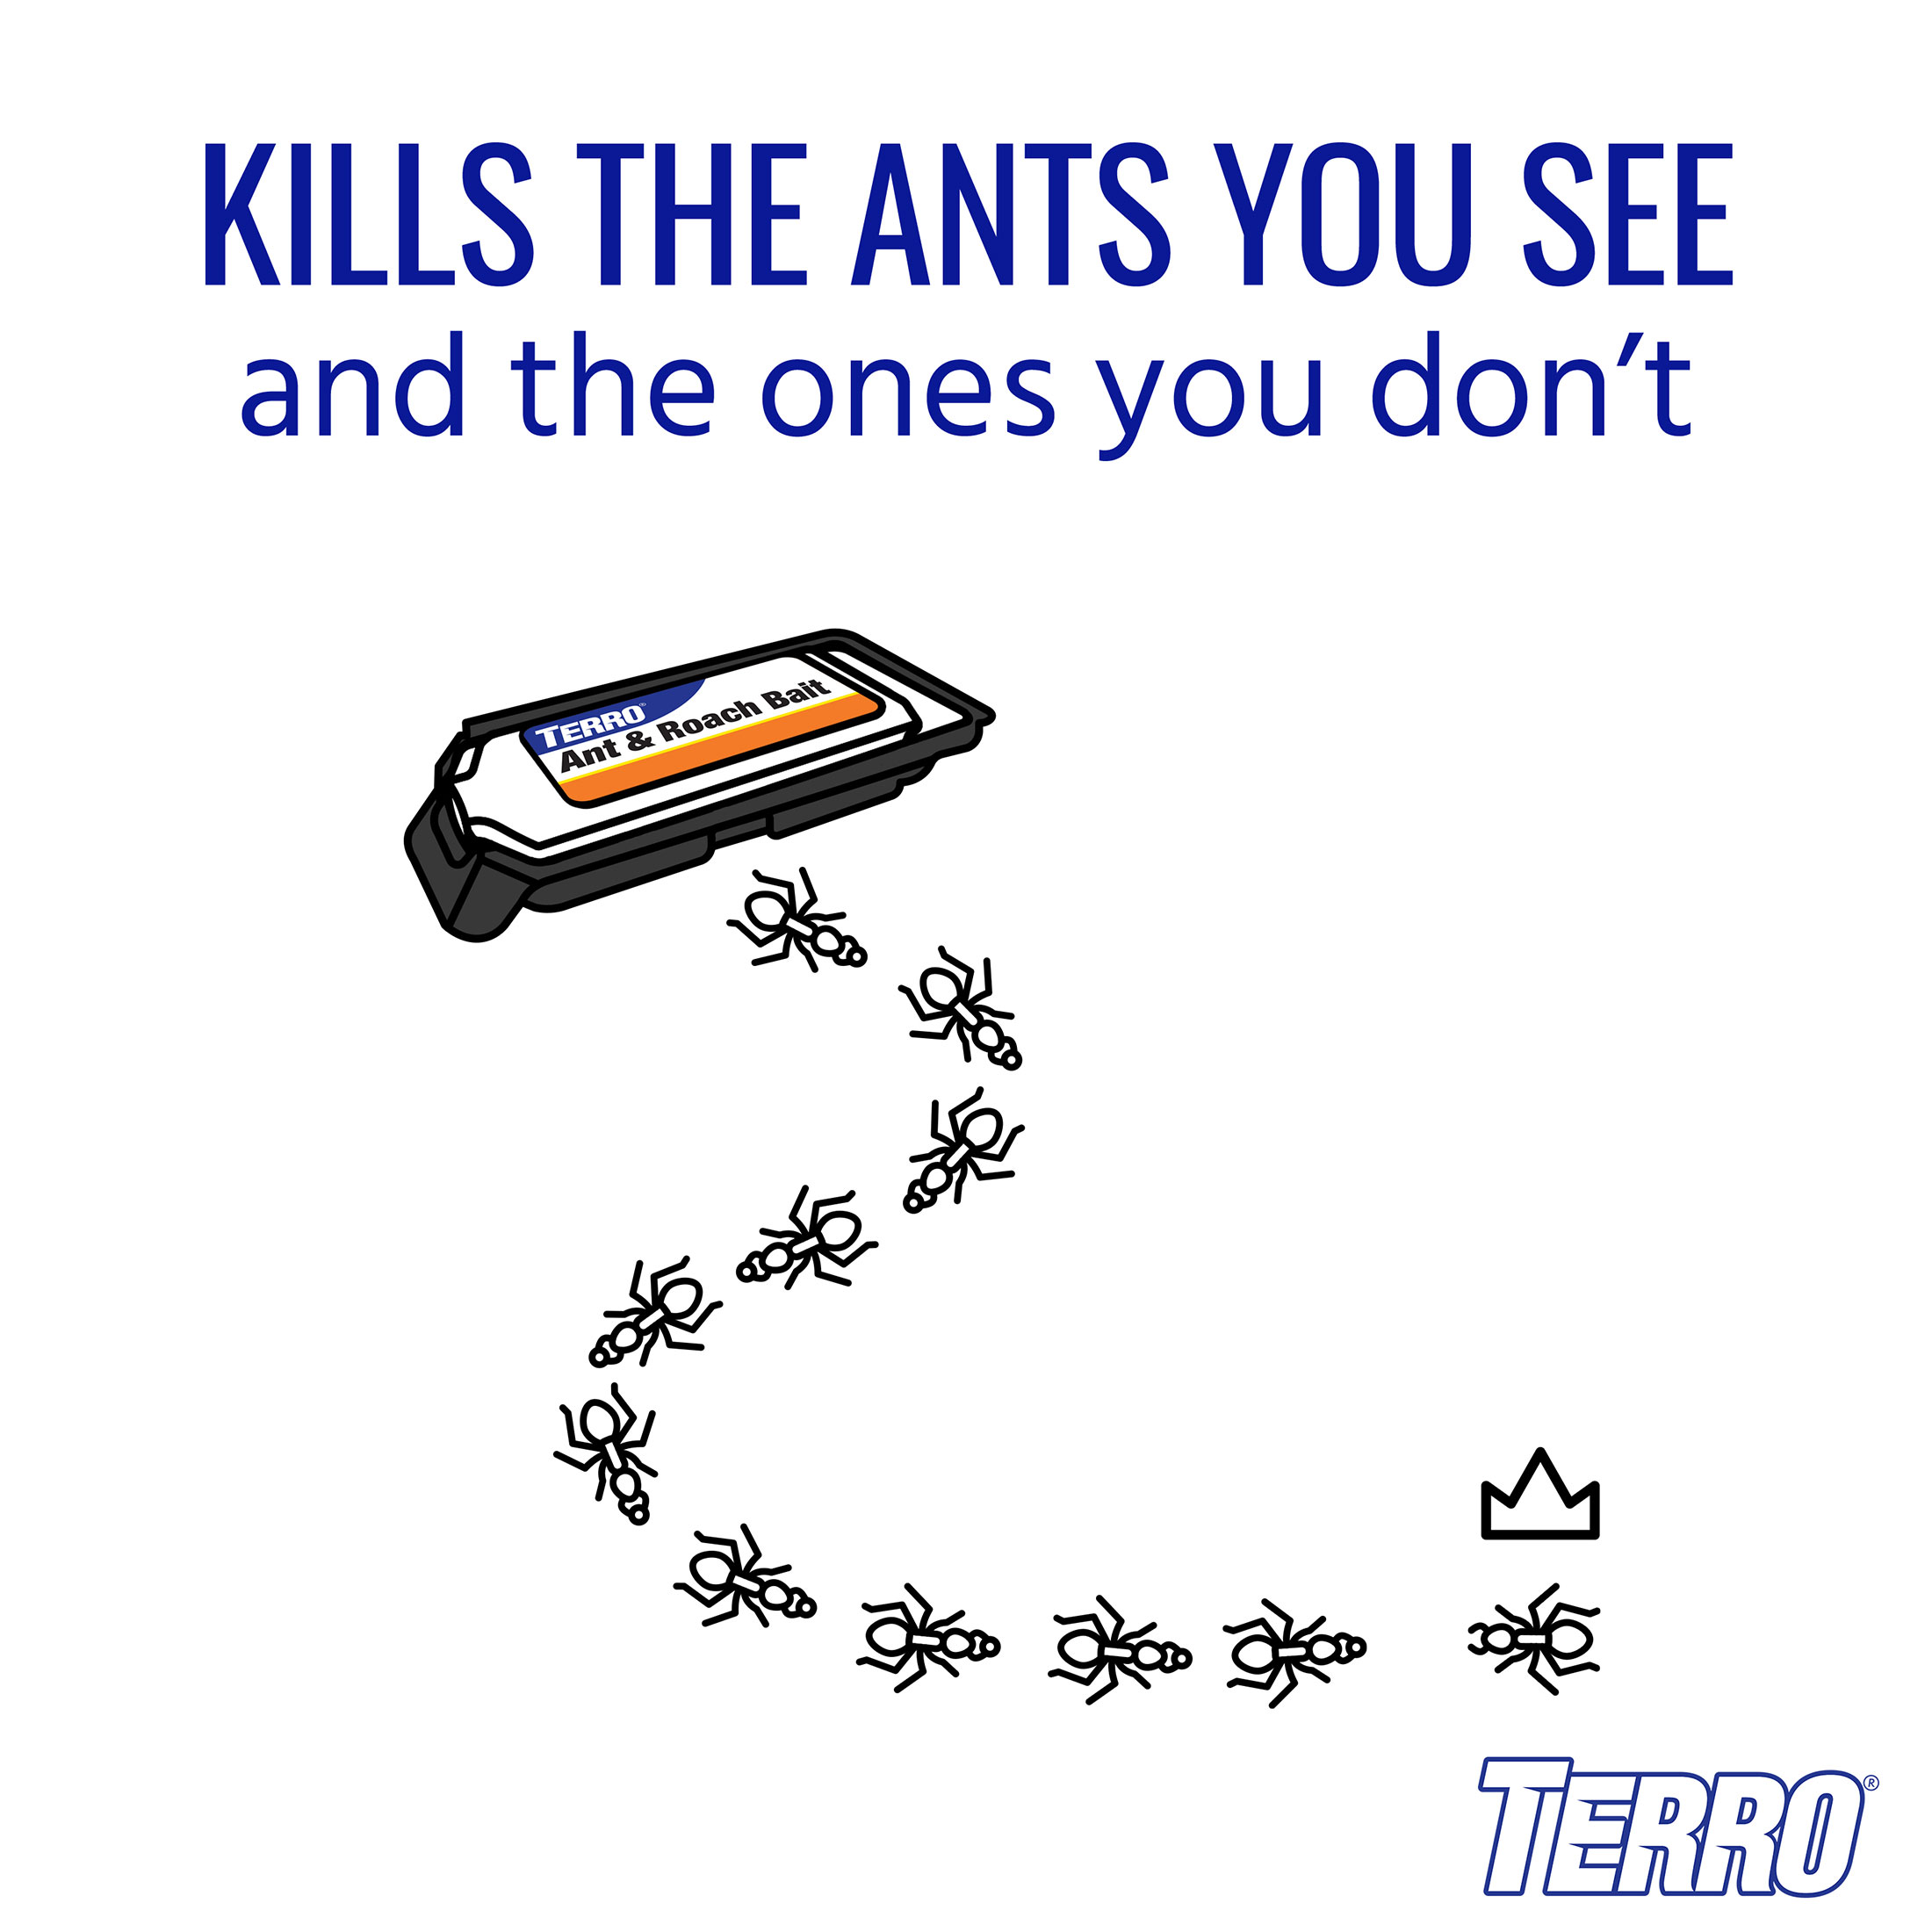 TERRO Ant and Roach Baits - image 4 of 9